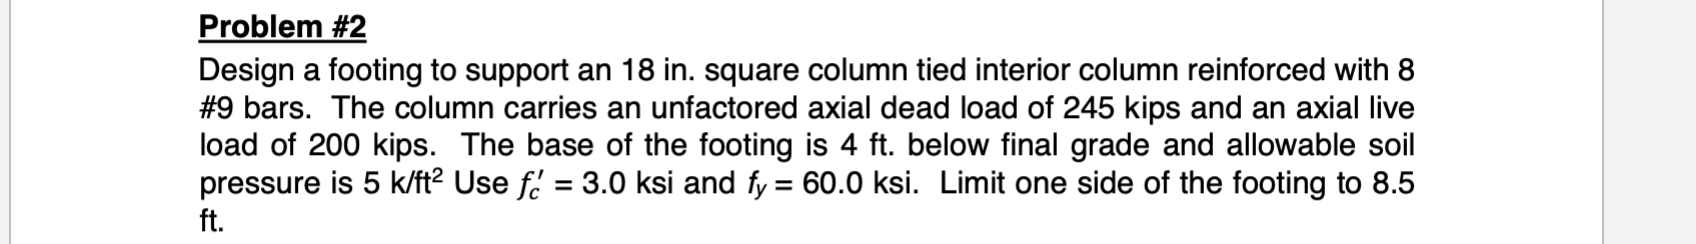 Problem #2
Design a footing to support an 18 in. square column tied interior column reinforced with 8
#9 bars. The column carries an unfactored axial dead load of 245 kips and an axial live
load of 200 kips. The base of the footing is 4 ft. below final grade and allowable soil
pressure is 5 k/ft2 Use f' 3.0 ksi and fy 60.0 ksi. Limit one side of the footing to 8.5
ft.
